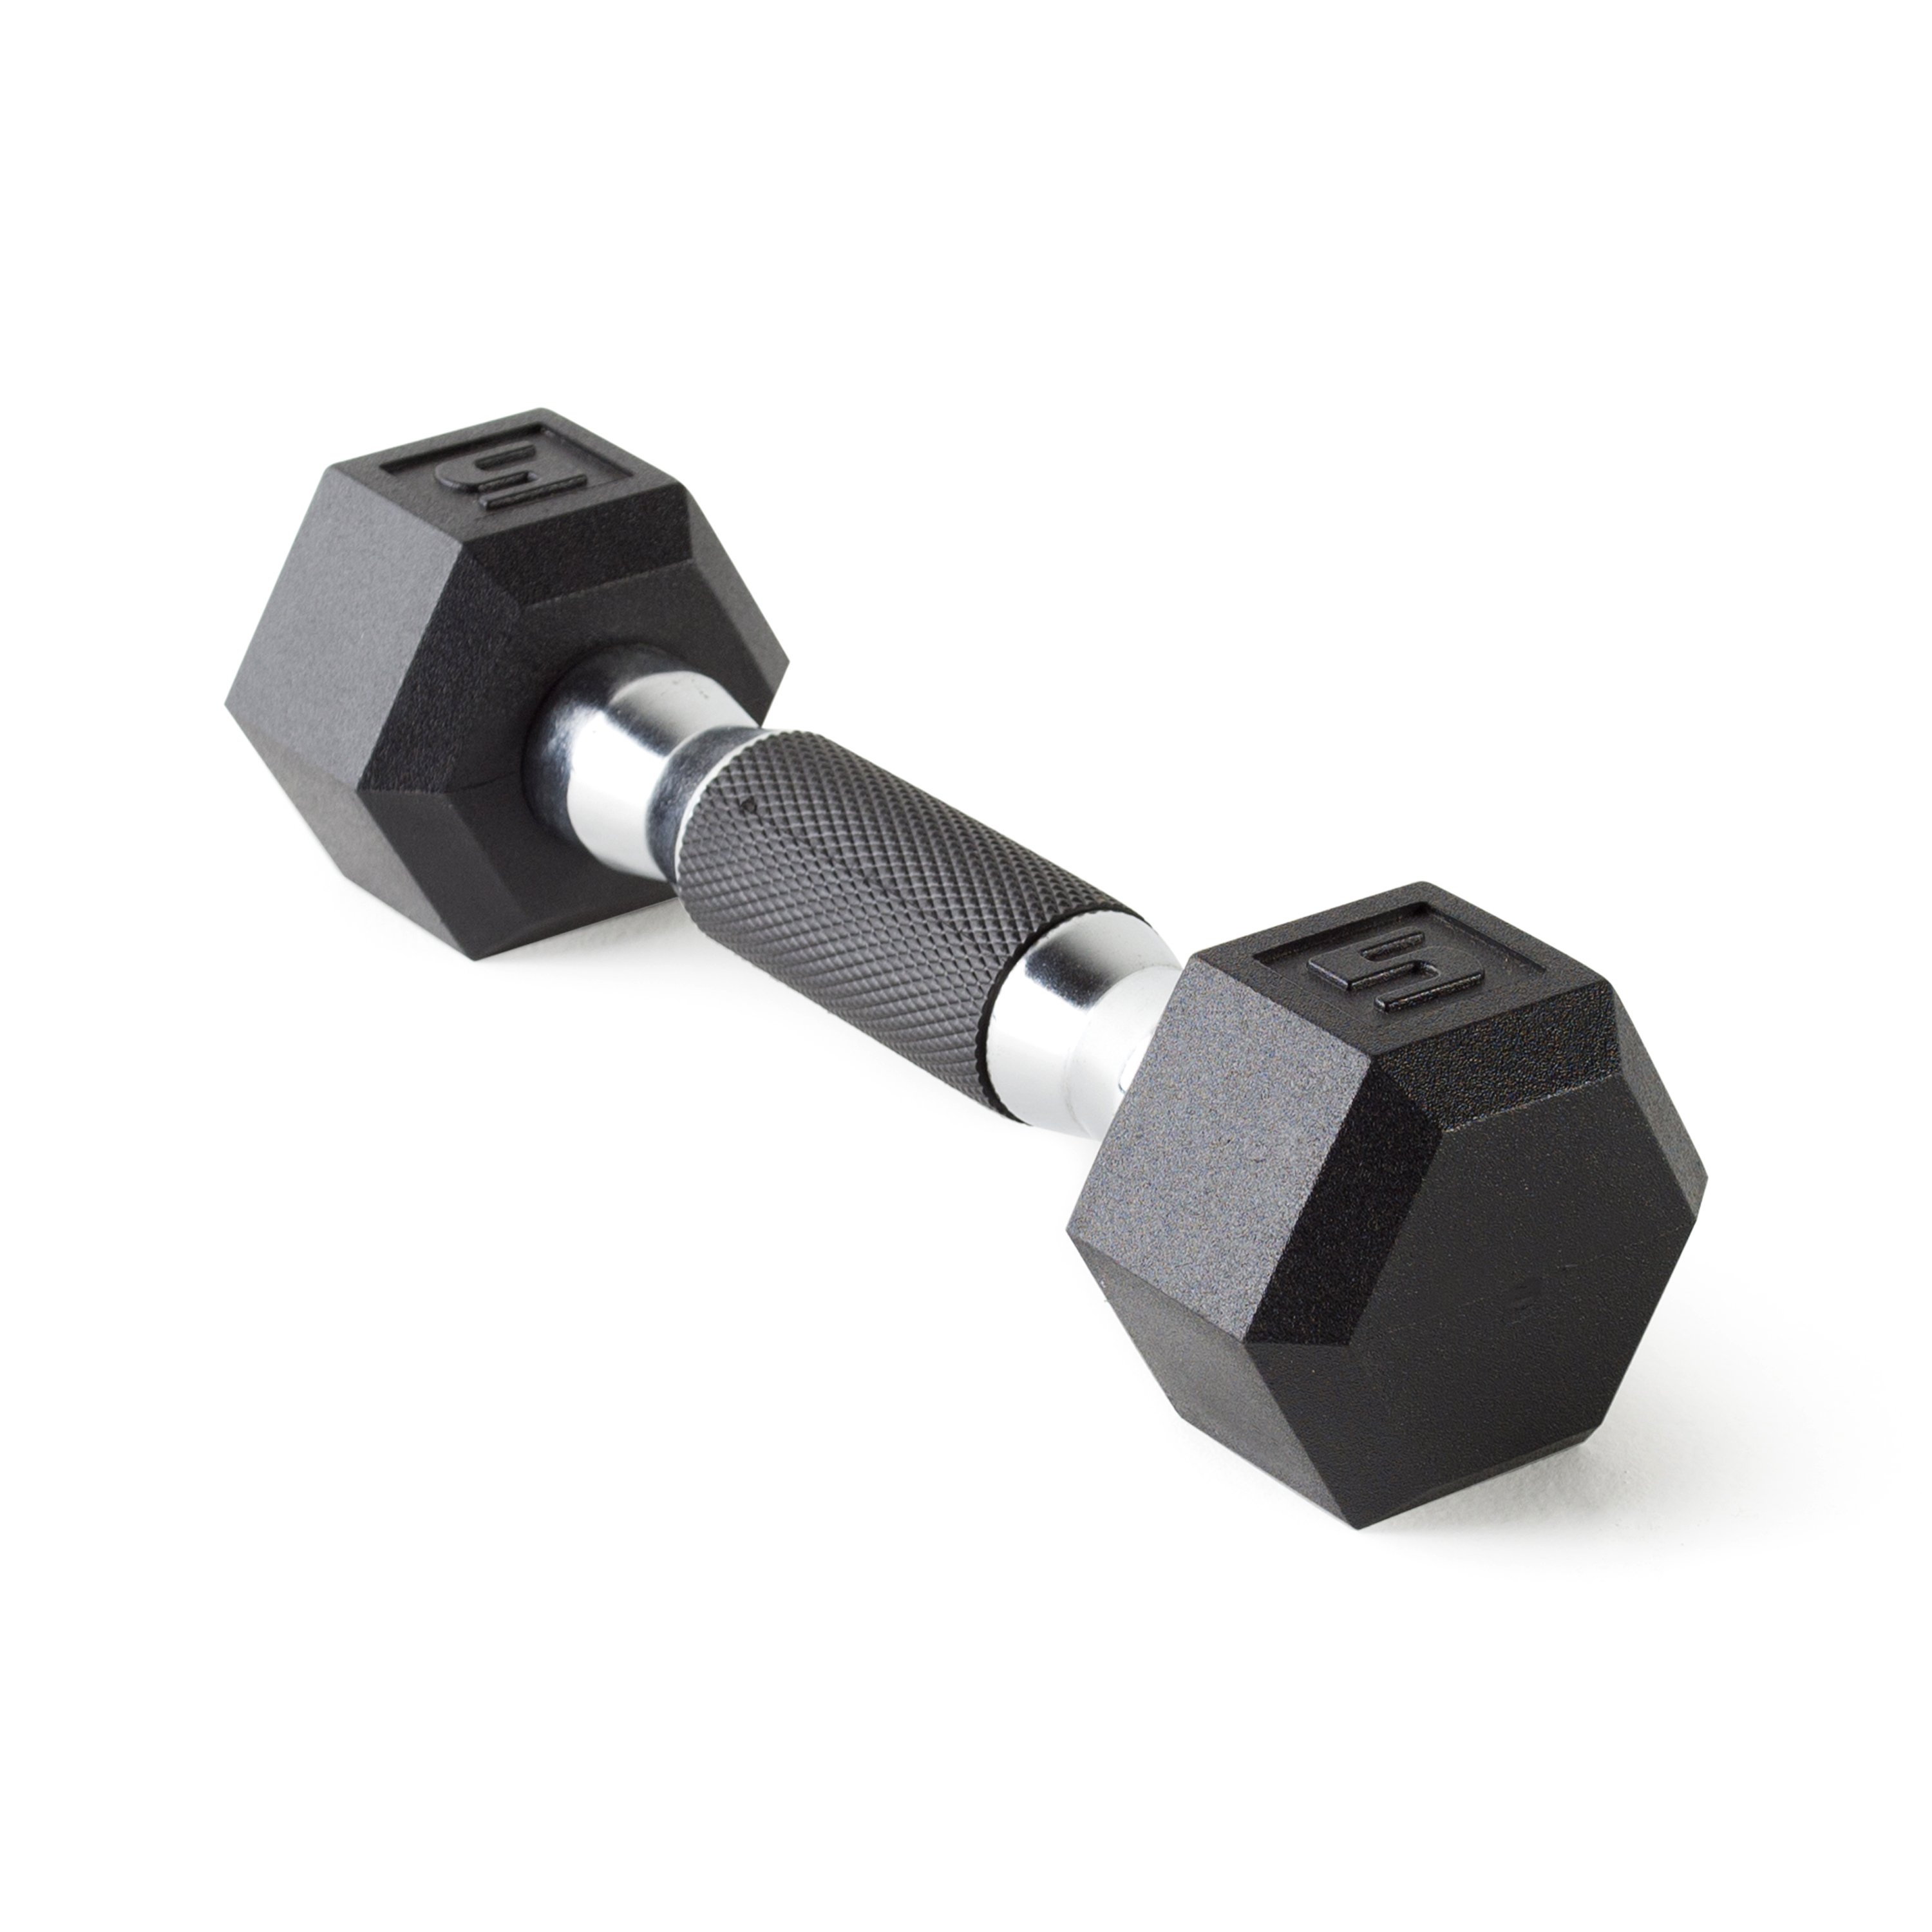 CAP Barbell Coated Dumbbells, Single, 5-50 Pounds - image 1 of 6